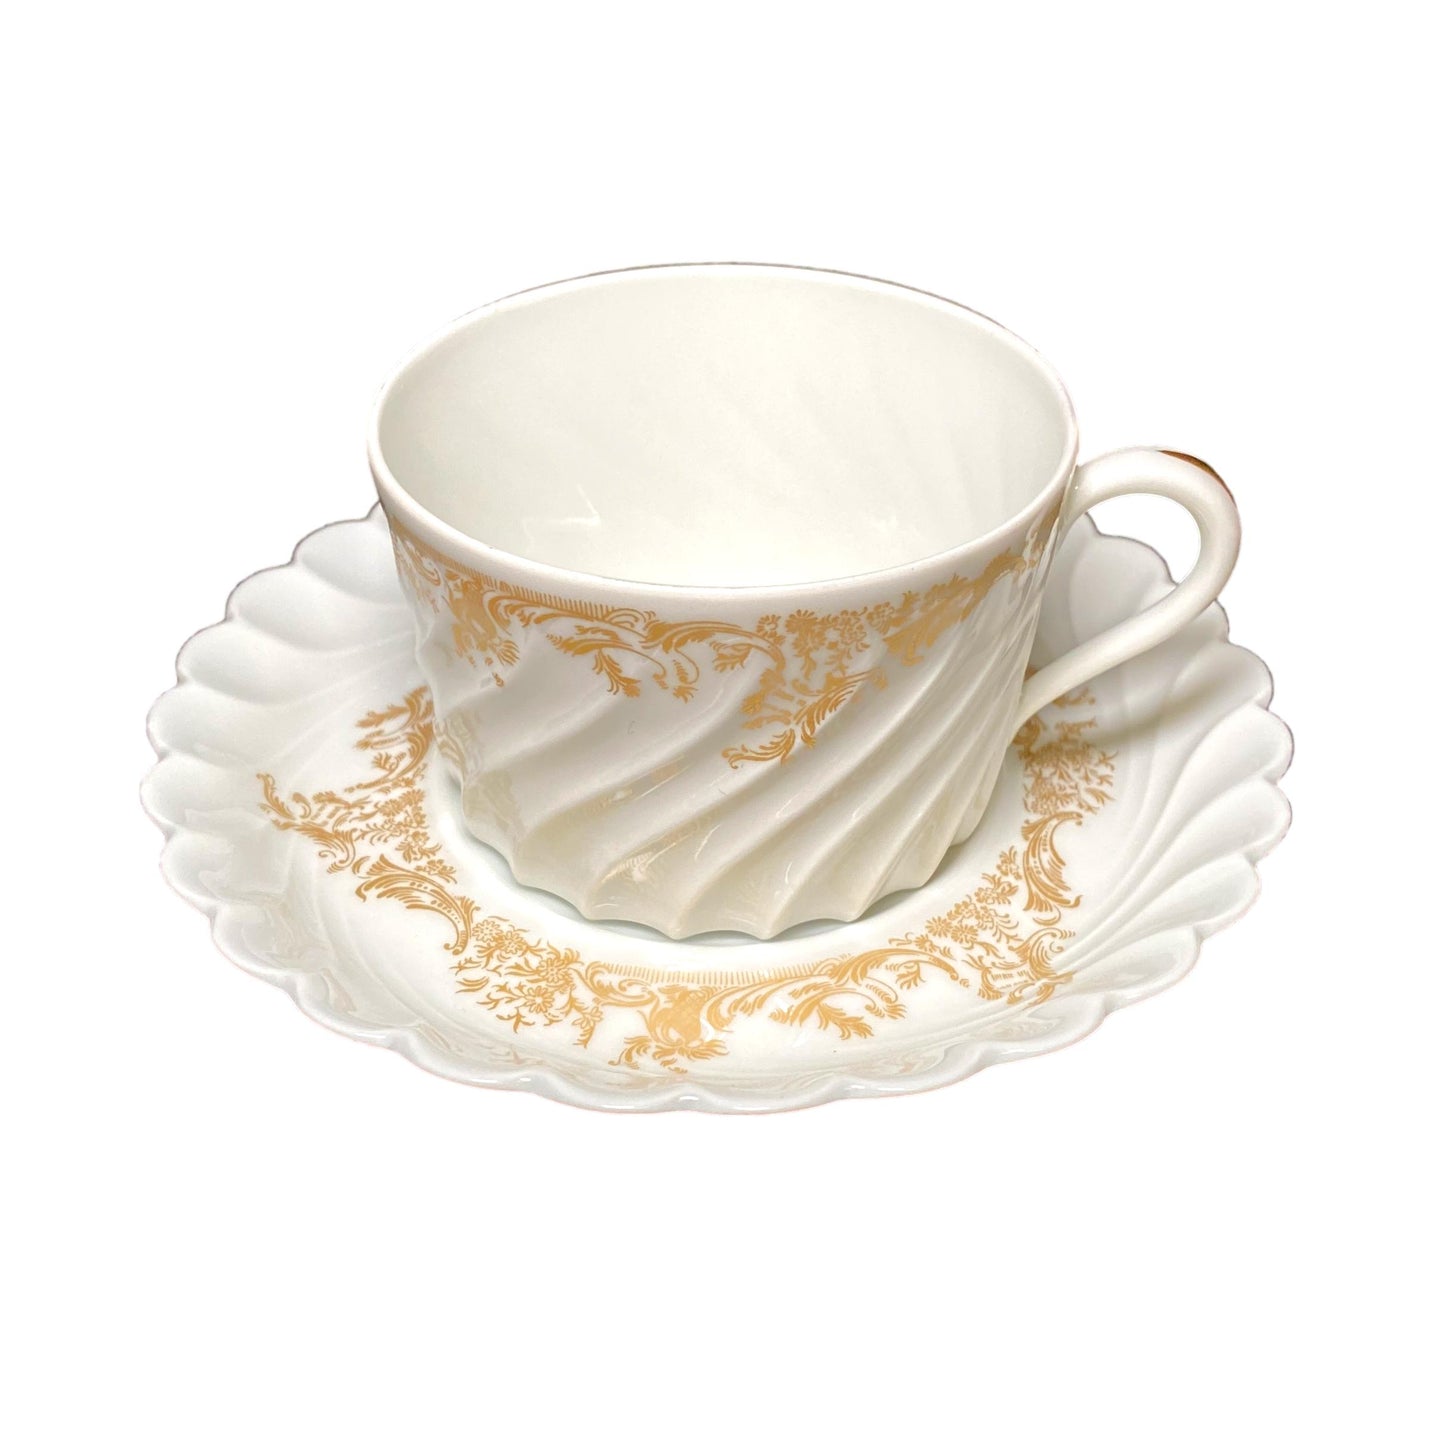 Haviland Limoges Ladore 13 Cups and Saucers